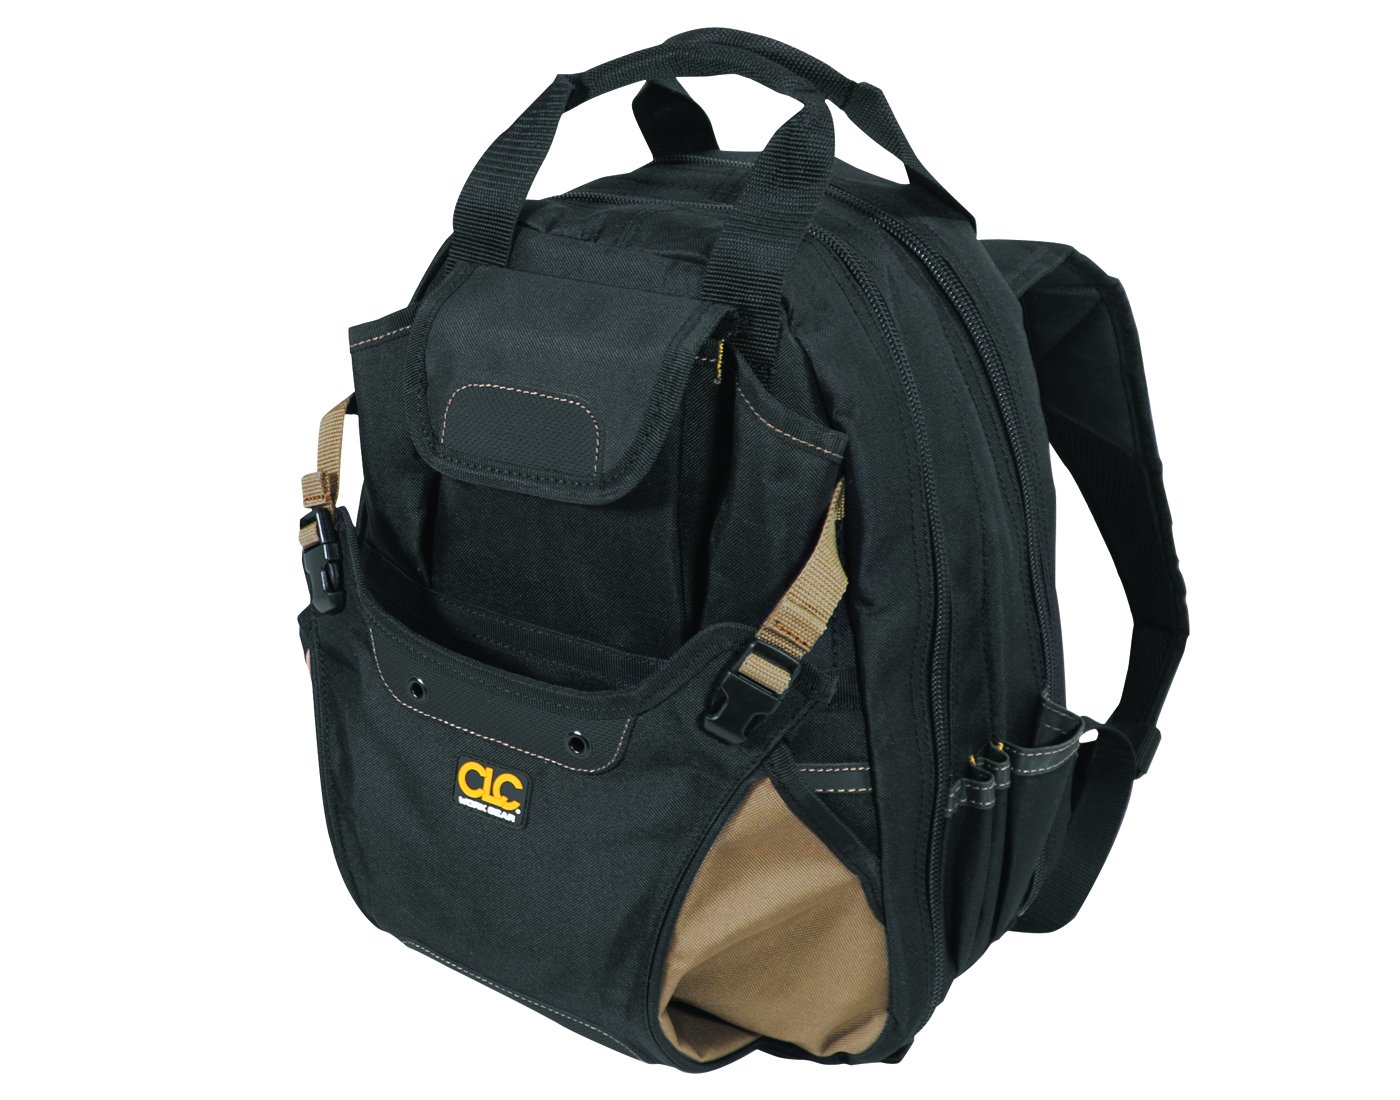 44-Pocket CLC Work Gear Carpenter's Tool Backpack w/ Padded Back Support $70.35 + Free Shipping